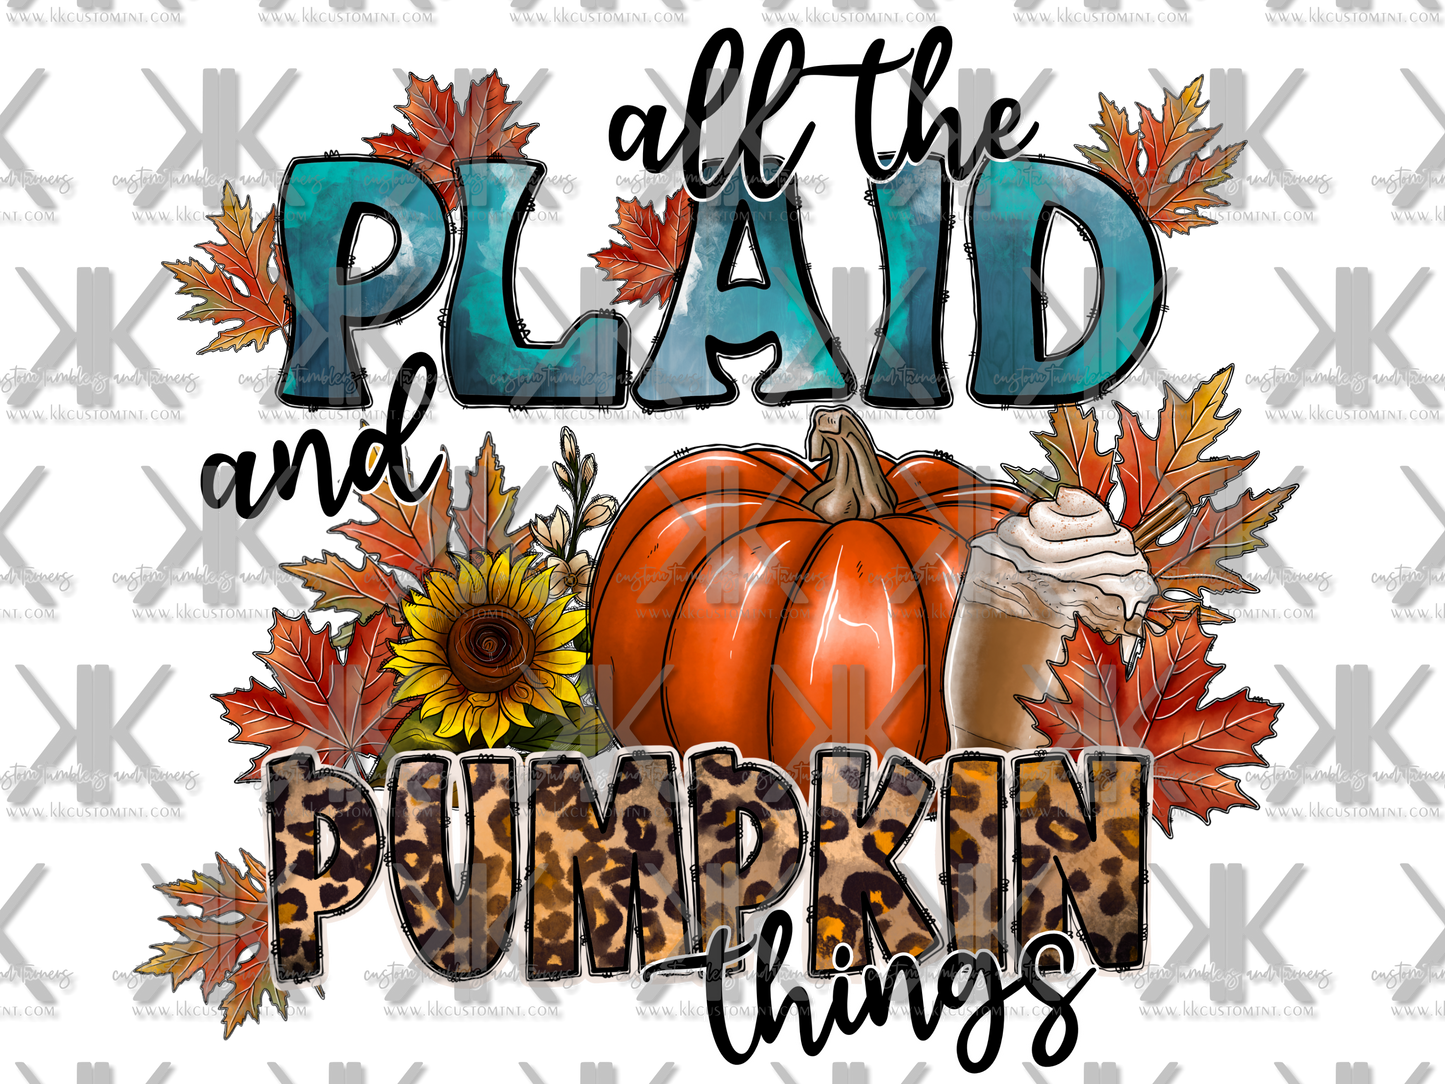 ALL THE PLAID & PUMKIN THINGS DTF